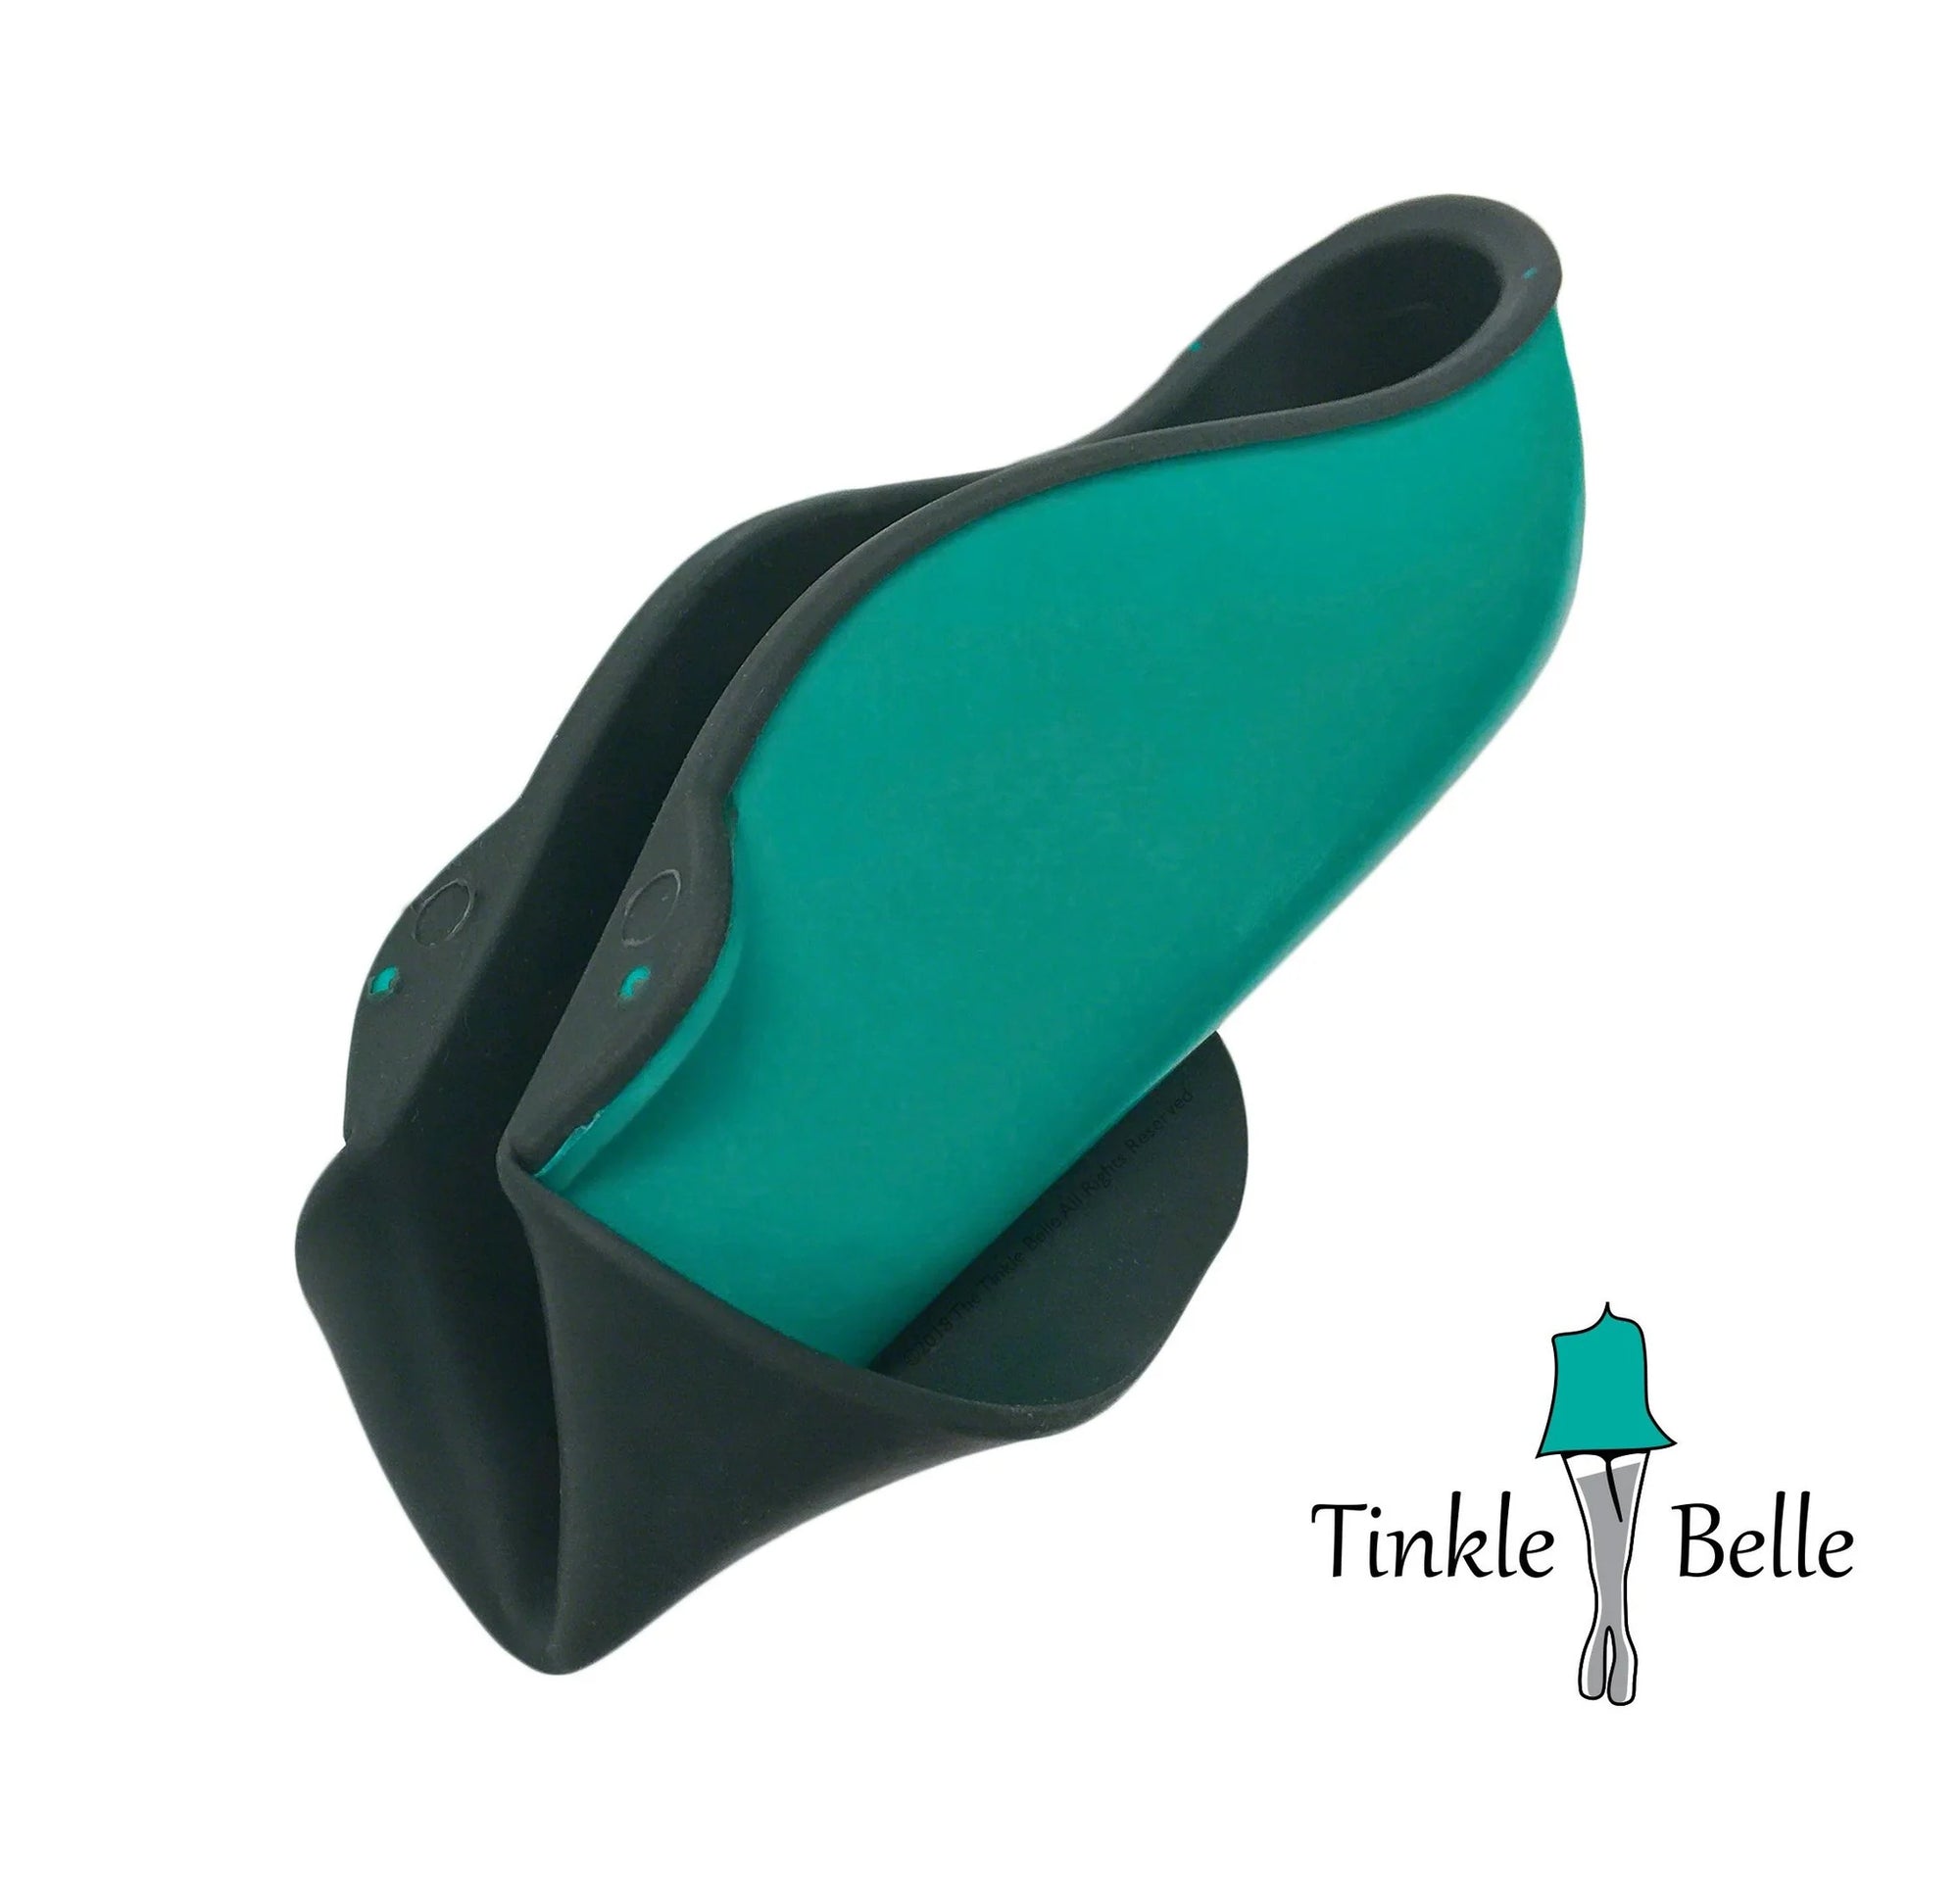 Tinkle Belle Female Urination Device